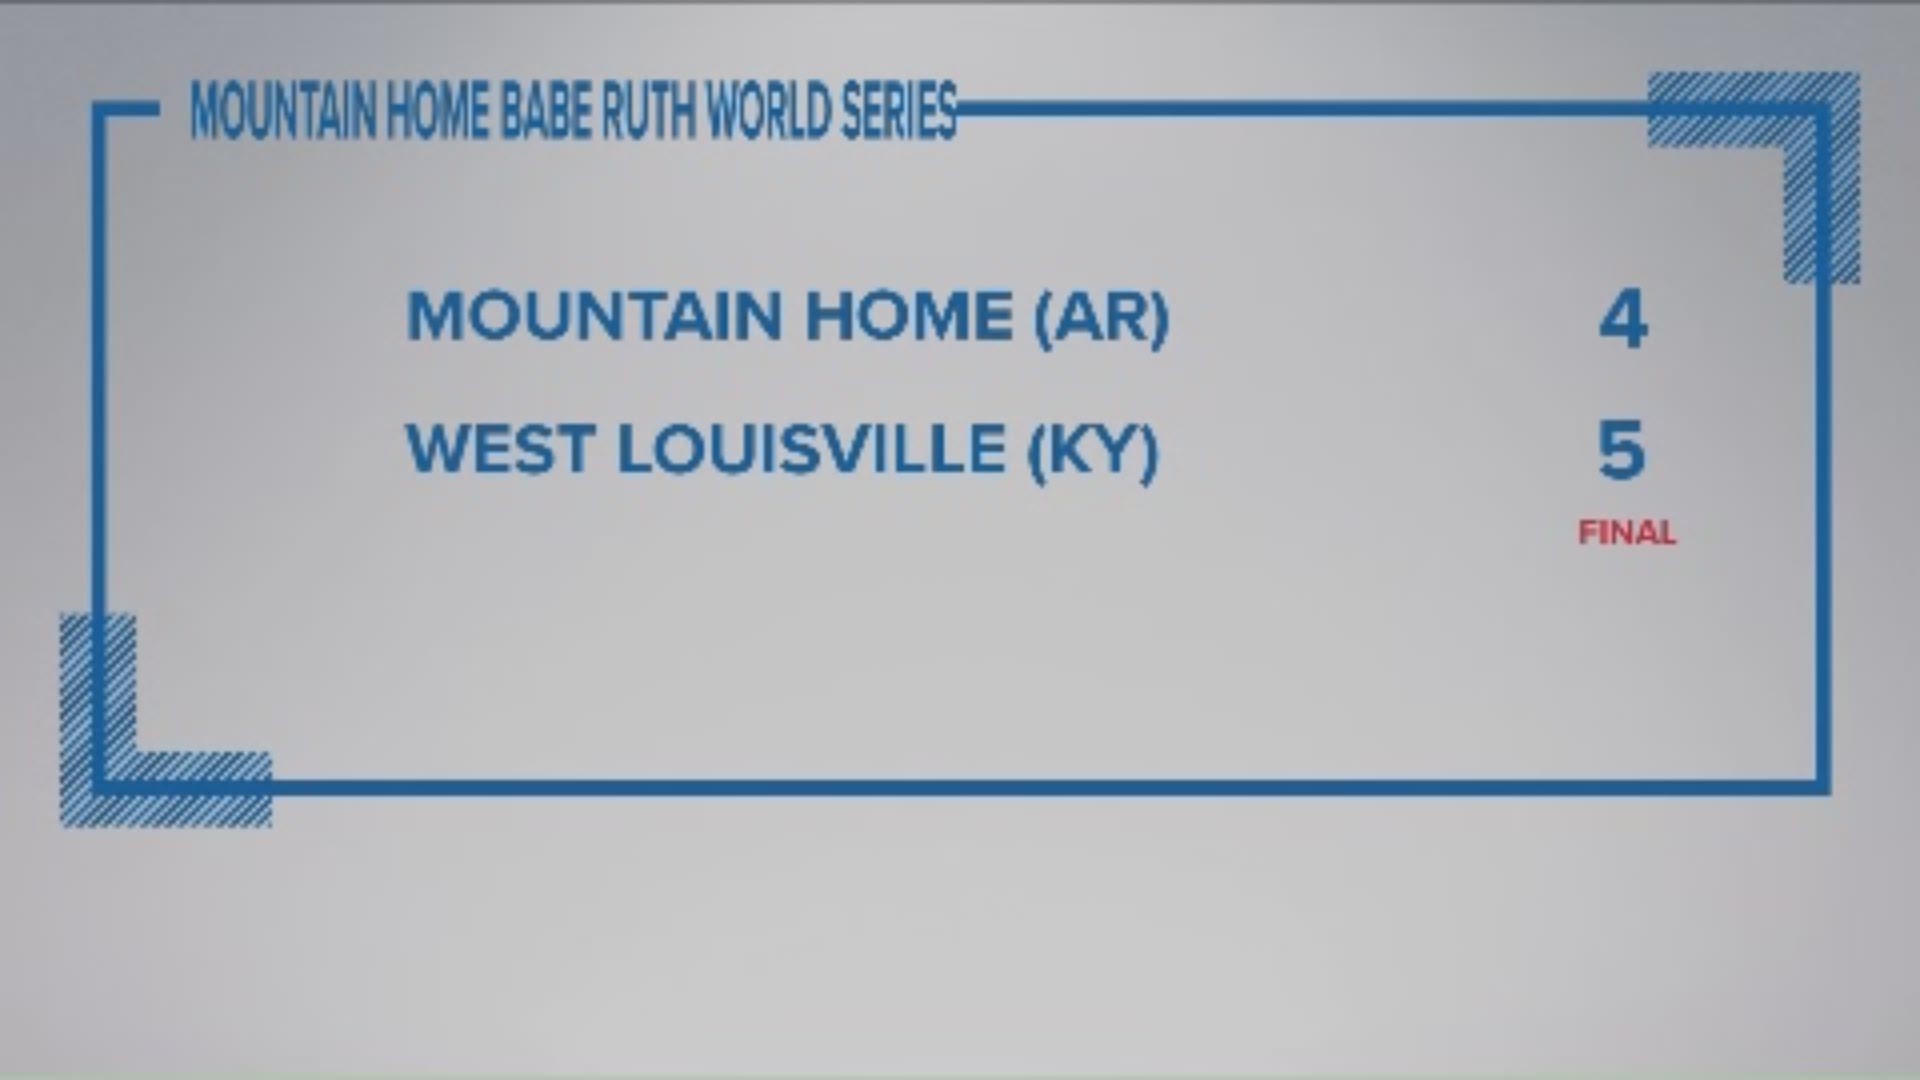 West Louisville baseball team got it's first win in this year's Babe Ruth World Series. The boys beat the hometown team of Mountain Home 5-4.